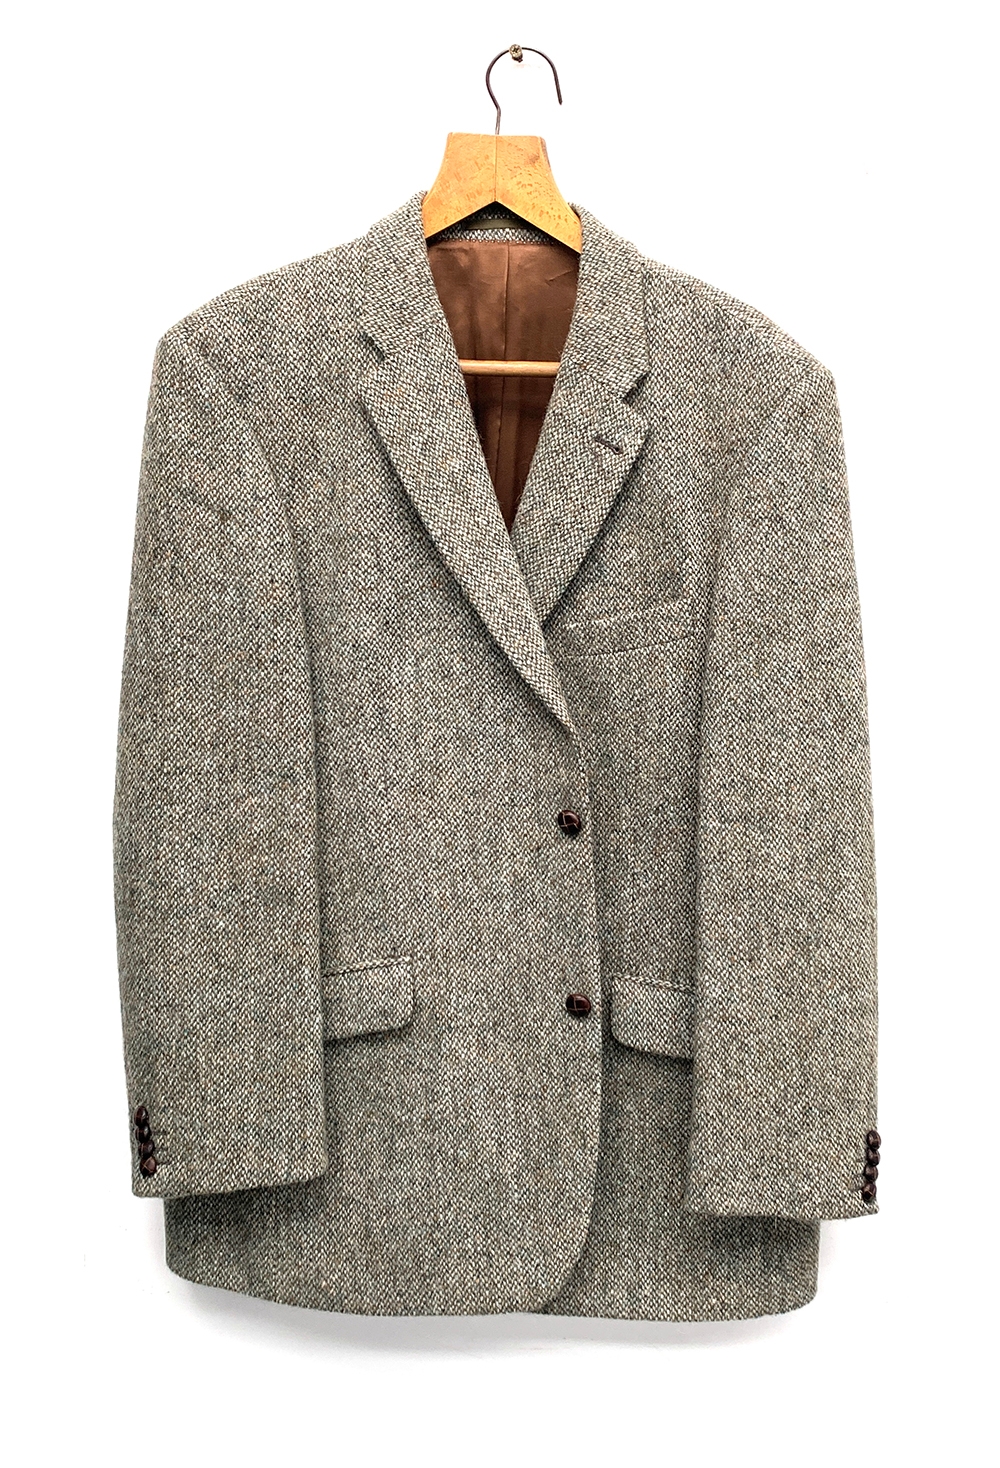 A Harris tweed single breasted jacket, chest 44"